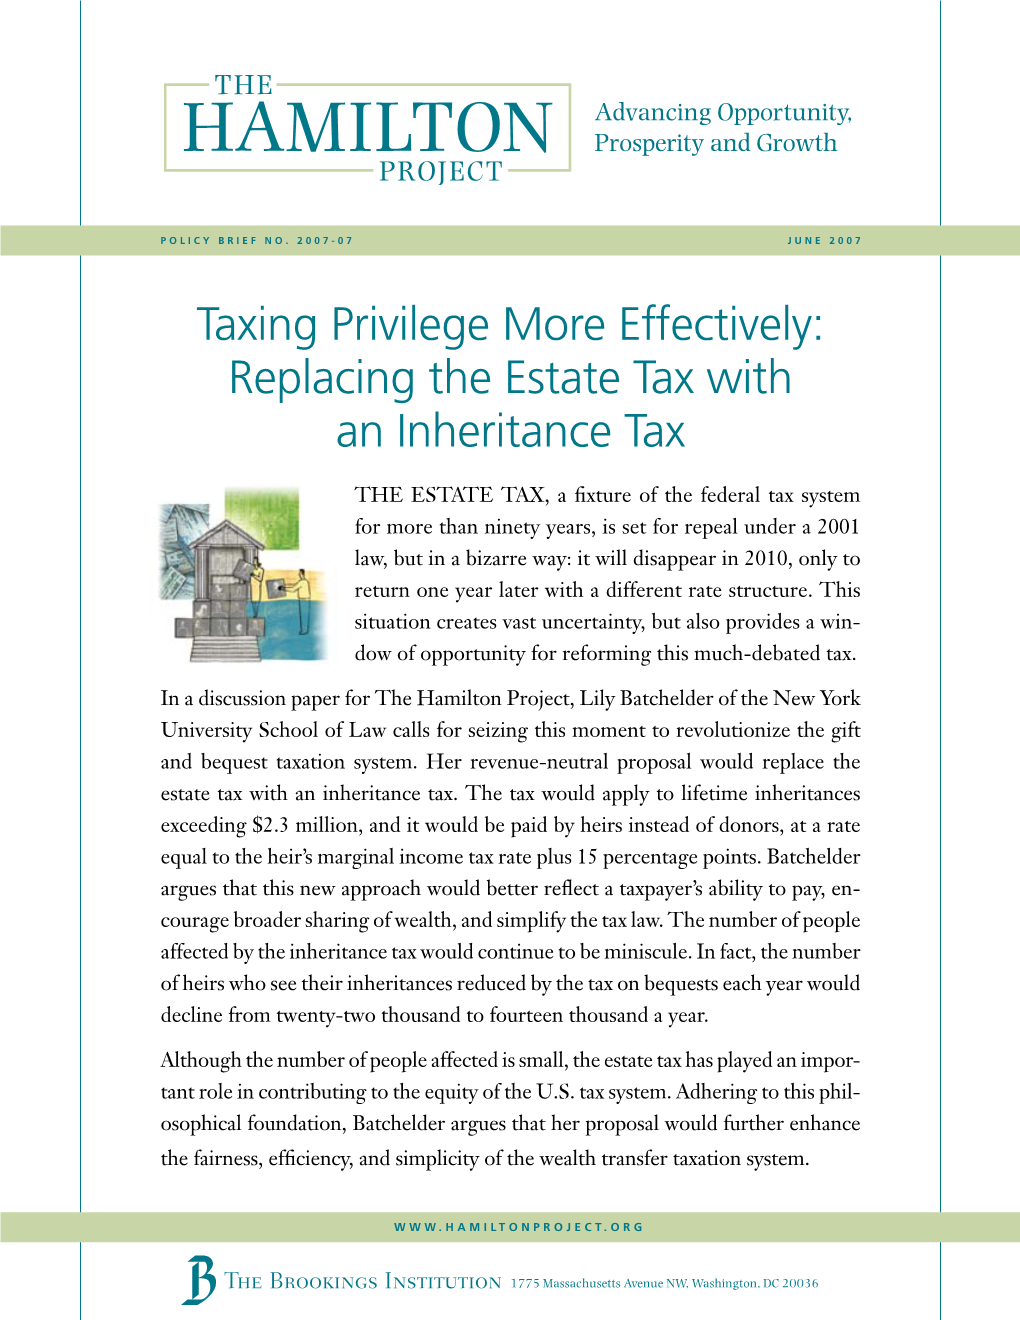 Taxing Privilege More Effectively: Replacing the Estate Tax with an Inheritance Tax